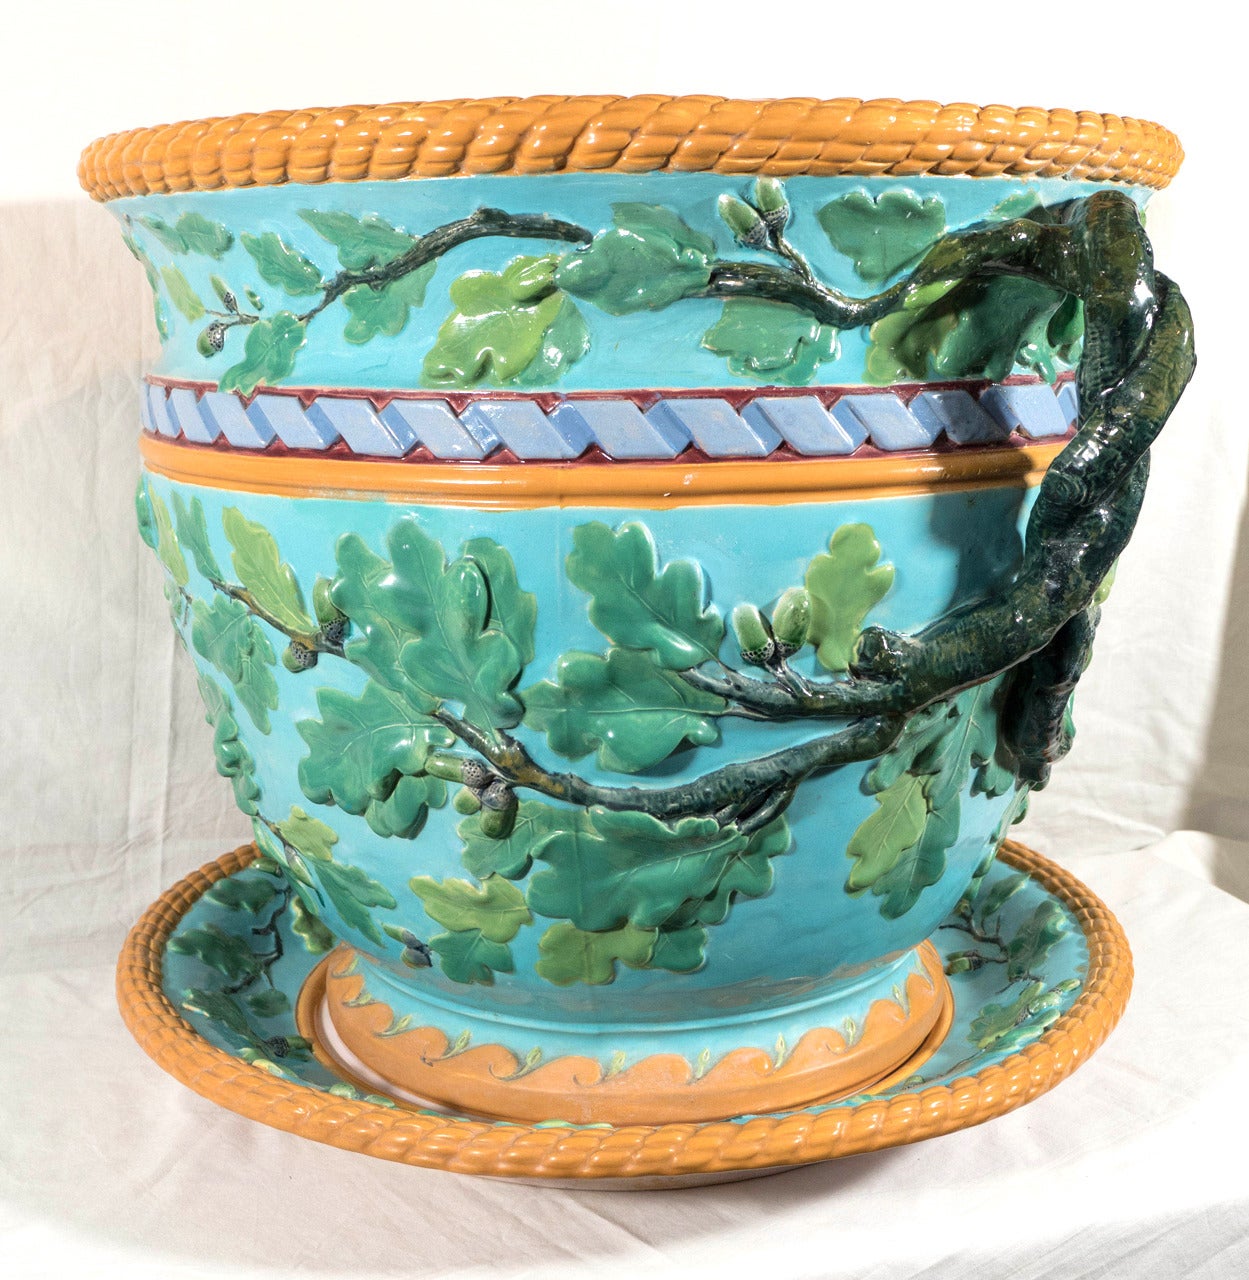 19th Century Large Minton Antique Majolica Planter with Green Leaves on a Turquoise Ground